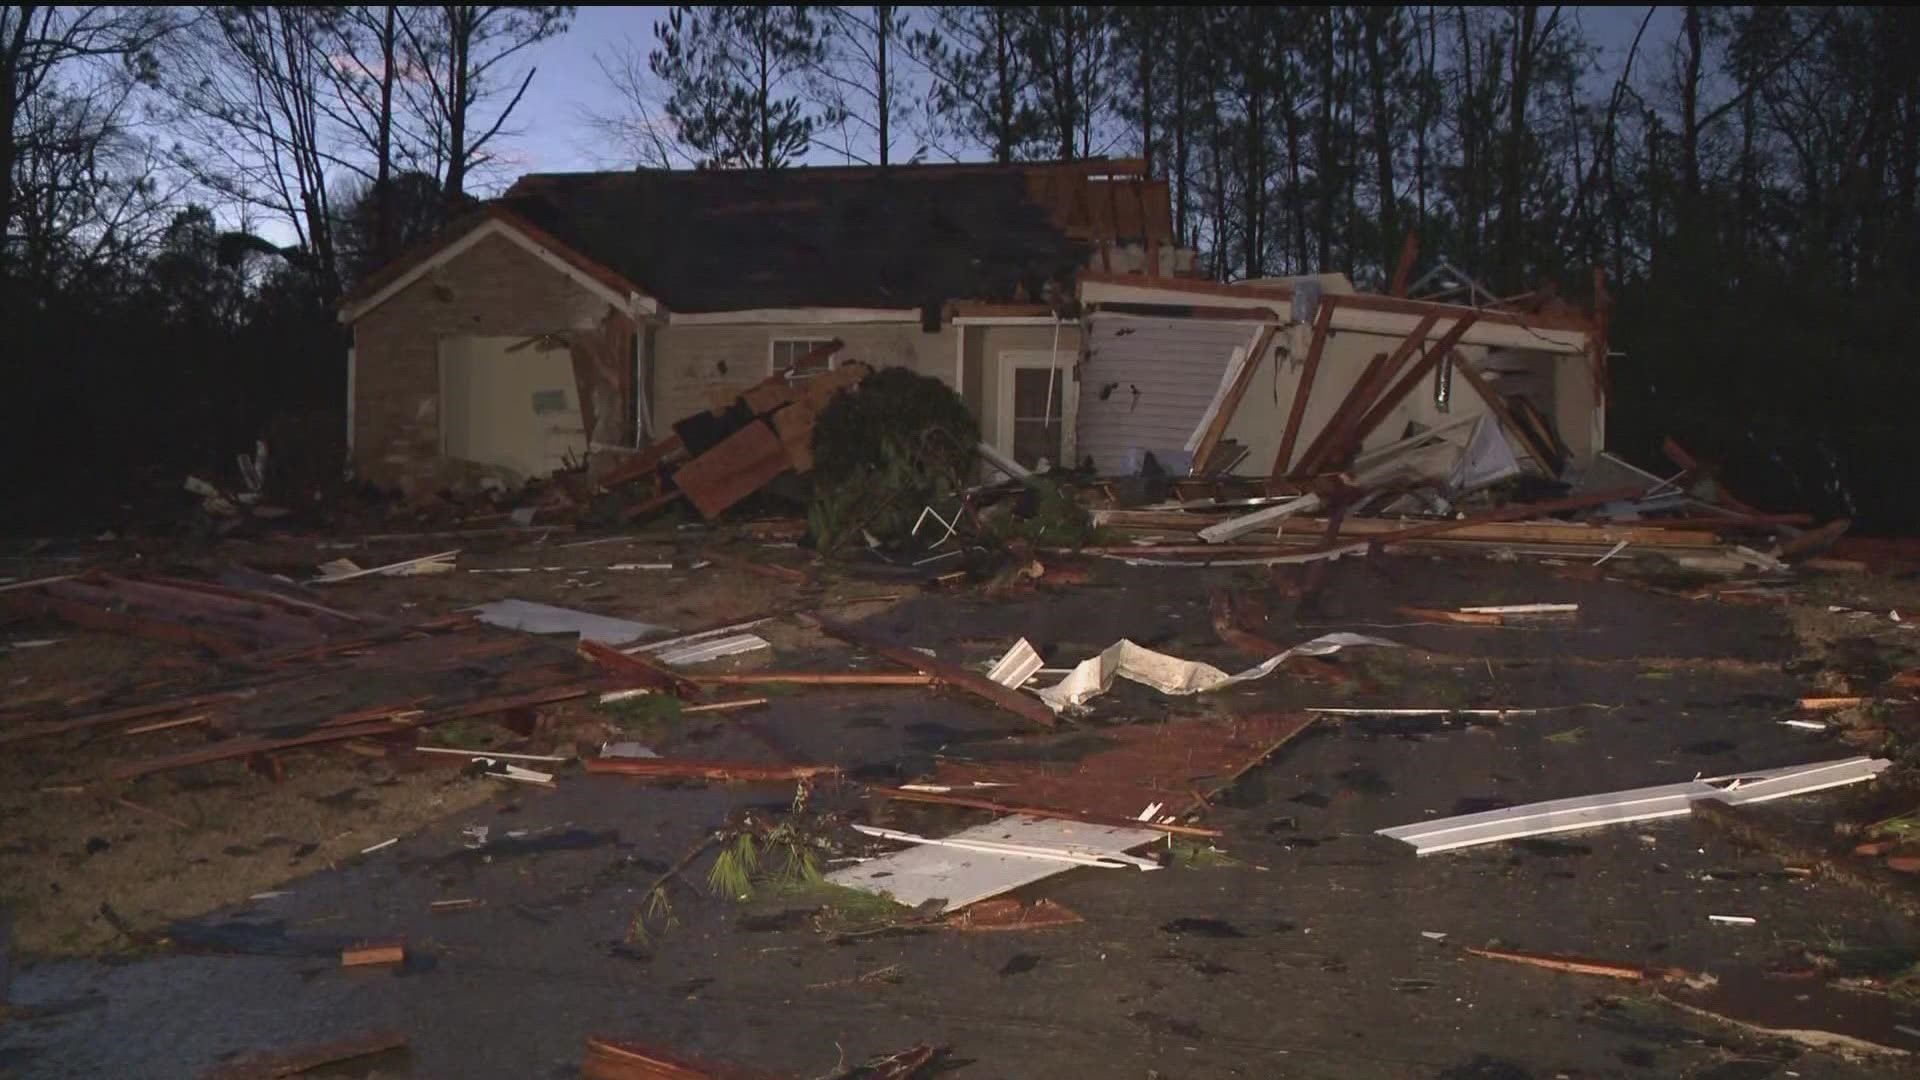 As the storm roared east from Alabama and into Georgia Thursday, it took aim at LaGrange and Troup County. Dozens of homes were damaged or destroyed.